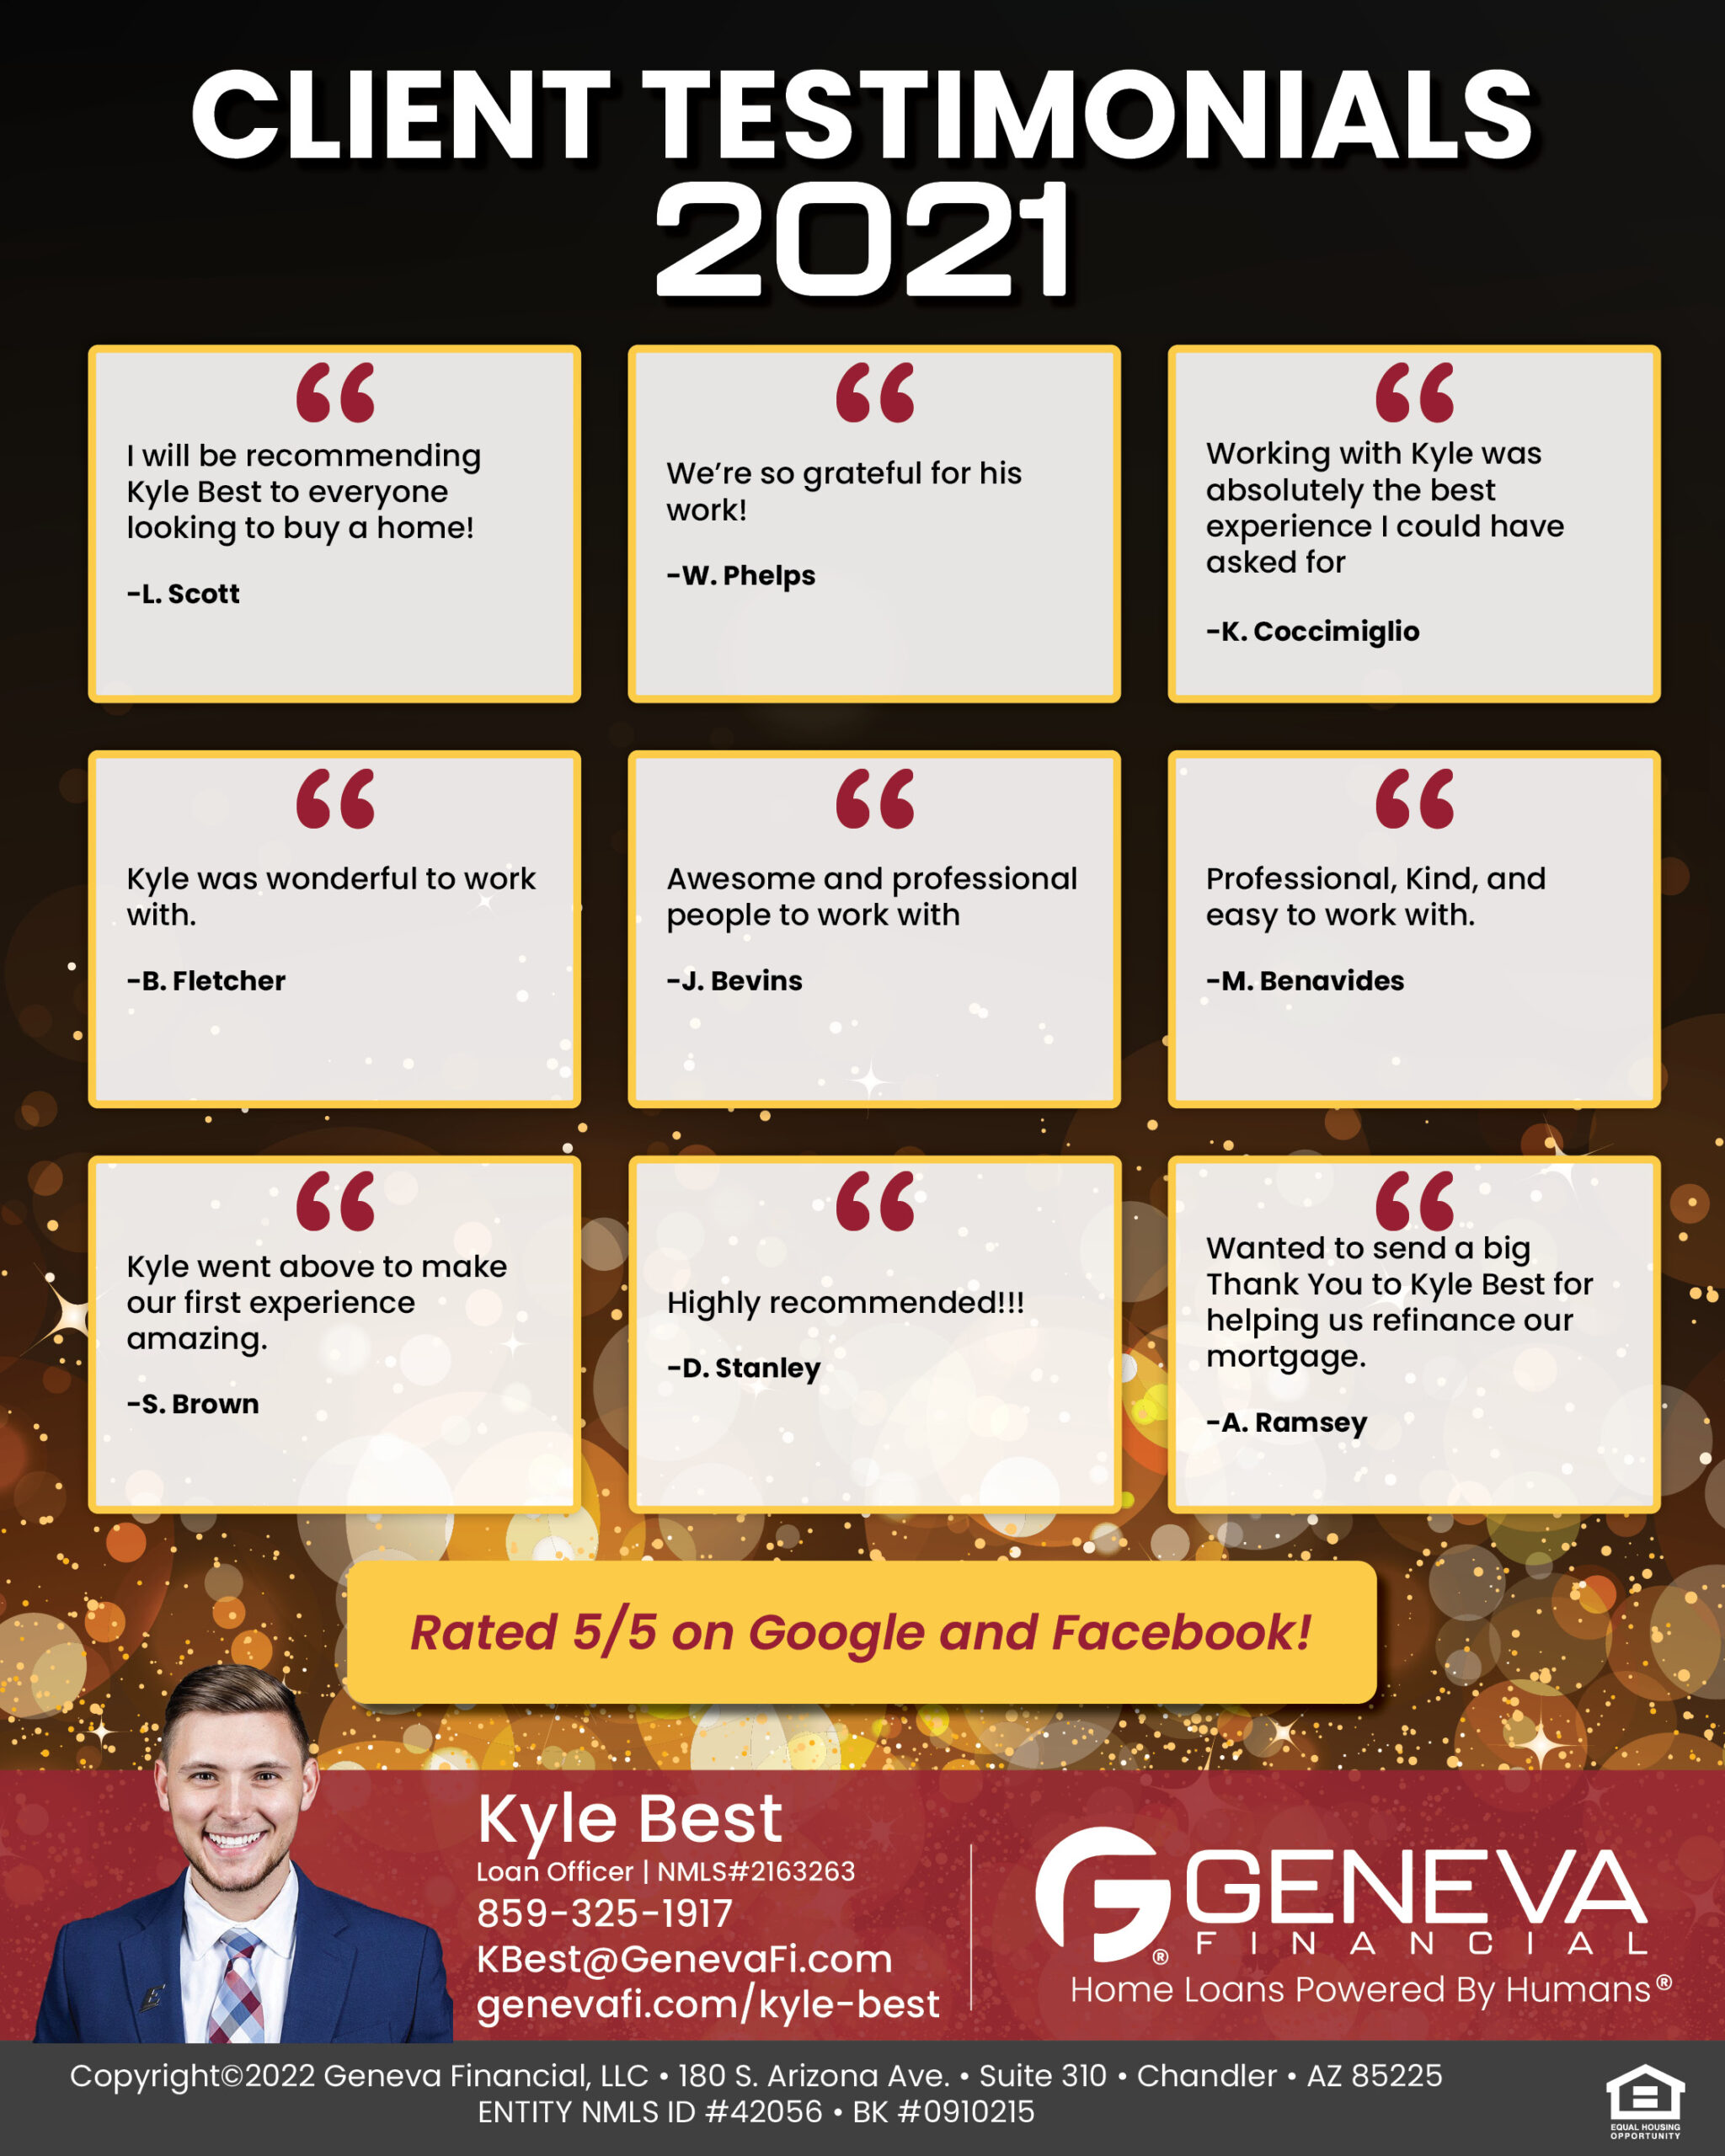 5 Star Reviews for Kyle Best, Licensed Mortgage Loan Officer with Geneva Financial, Lexington, Kentucky – Home Loans Powered by Humans®.